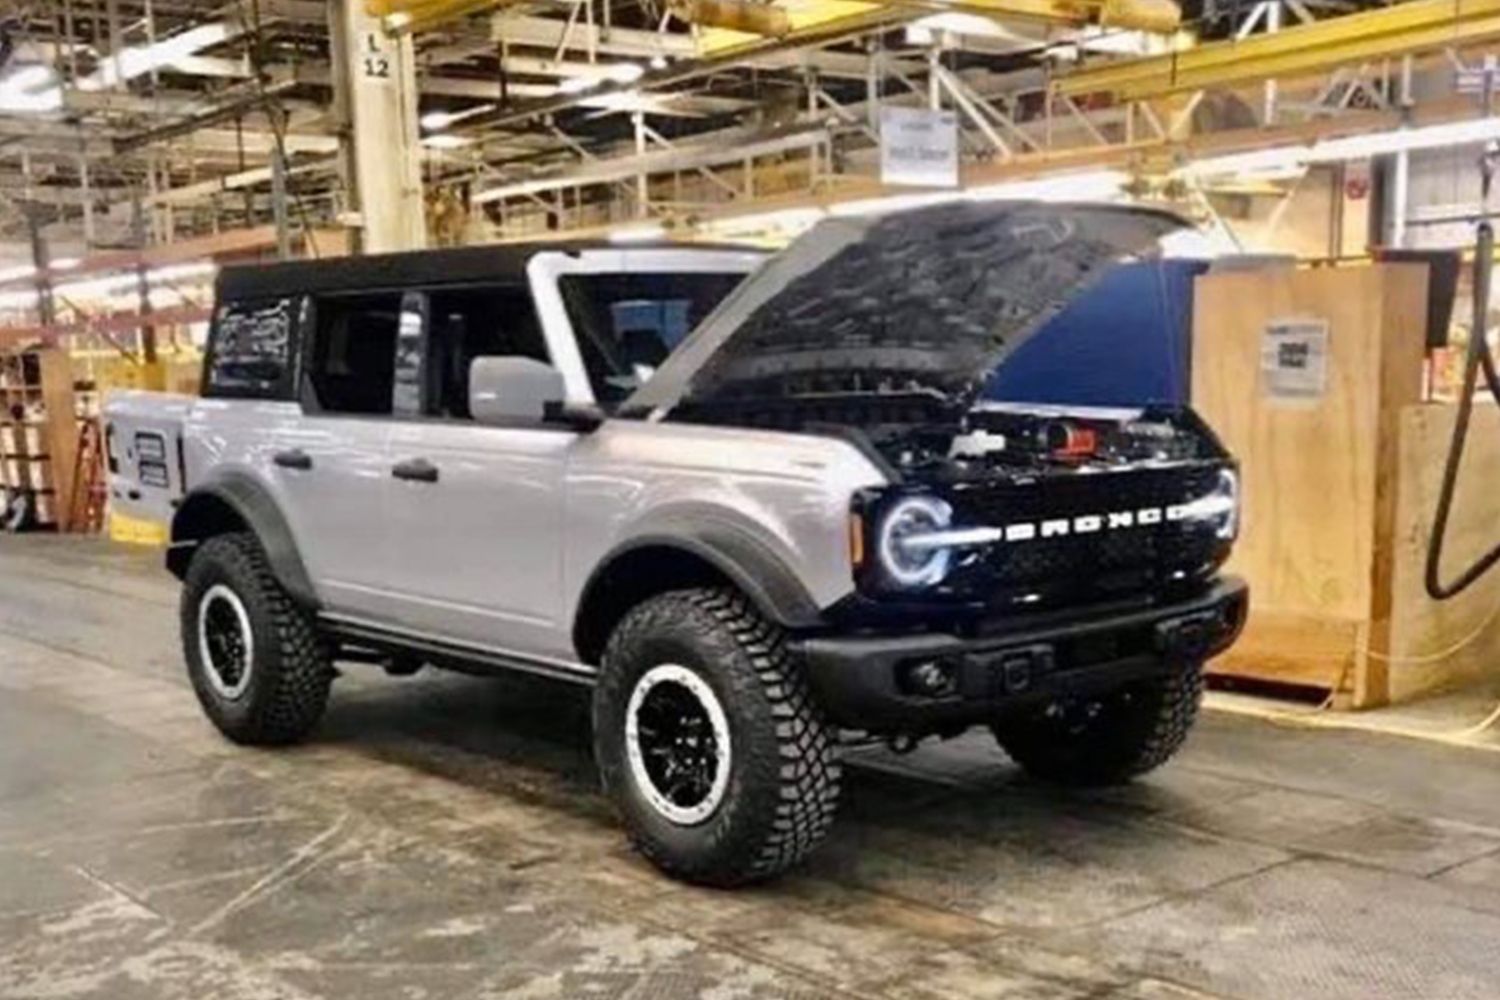 A Trove Of Authentic 2021 Ford Bronco Photos Just Leaked